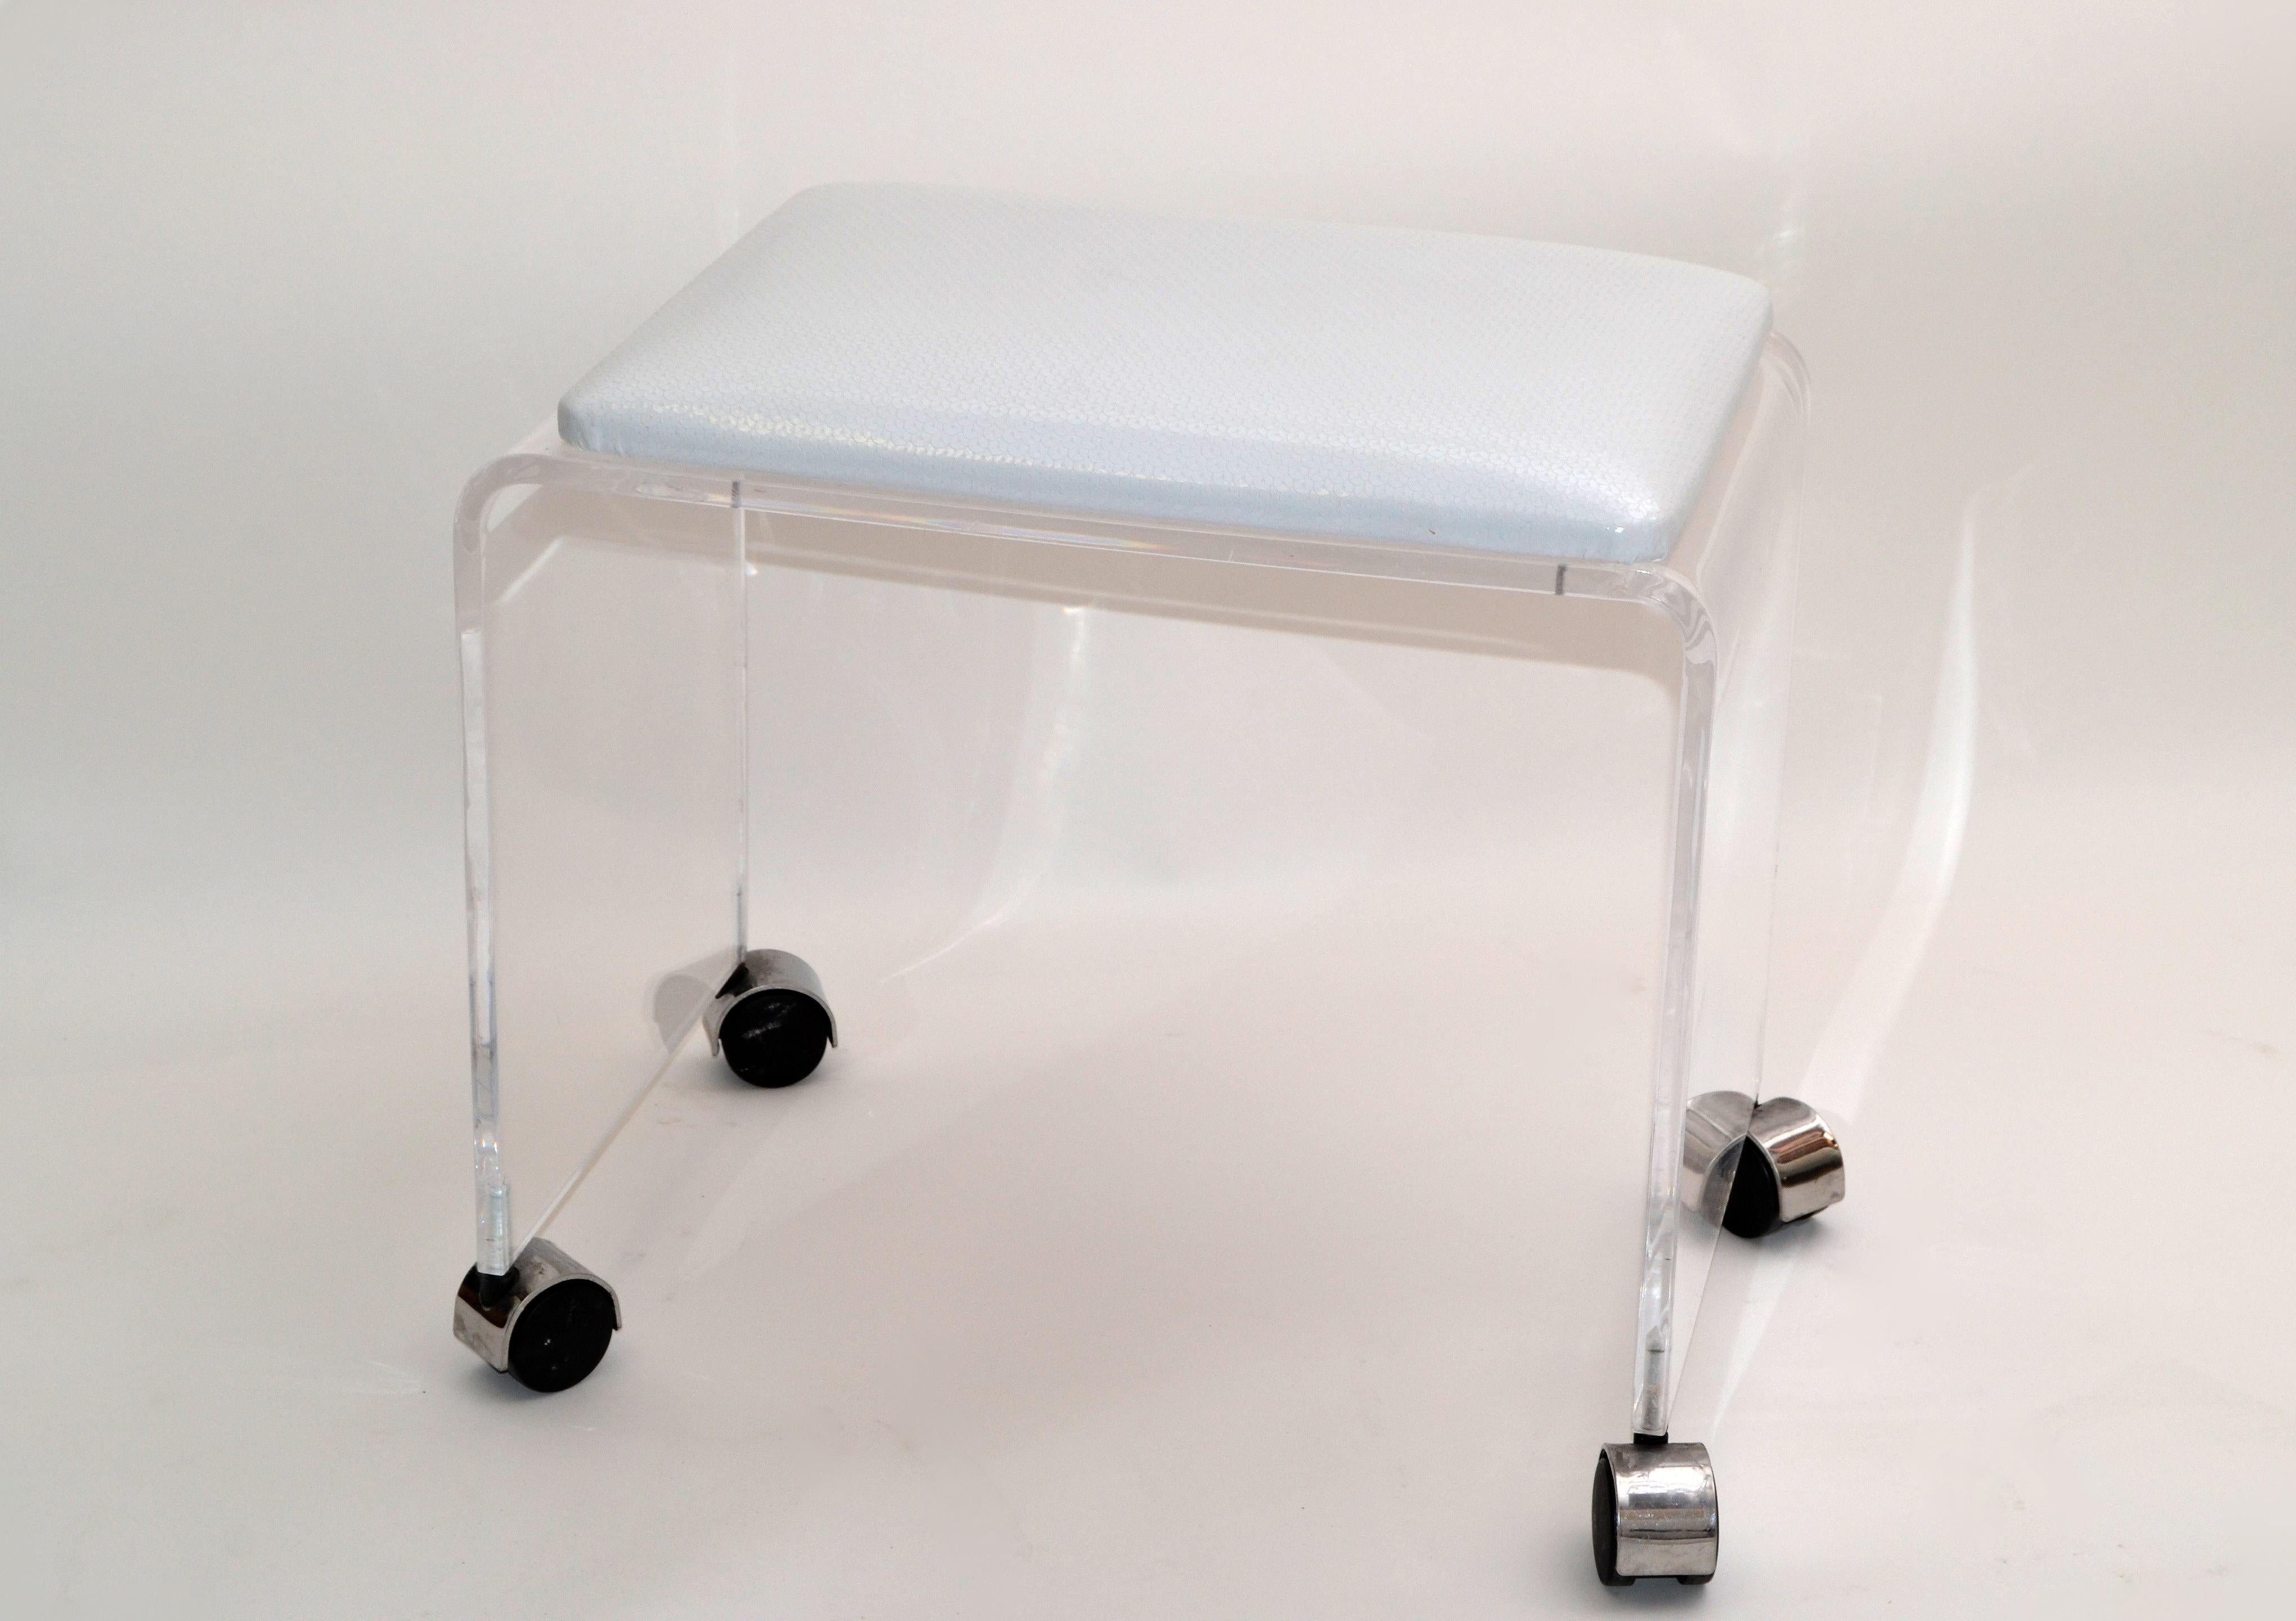 Mid-Century Modern Lucite stool with white vinyl seat on chrome casters.
This stool can be used as a footstool, vanity stool or a place to put your magazine.
The stool is firm and sturdy, ready for a new home.
  